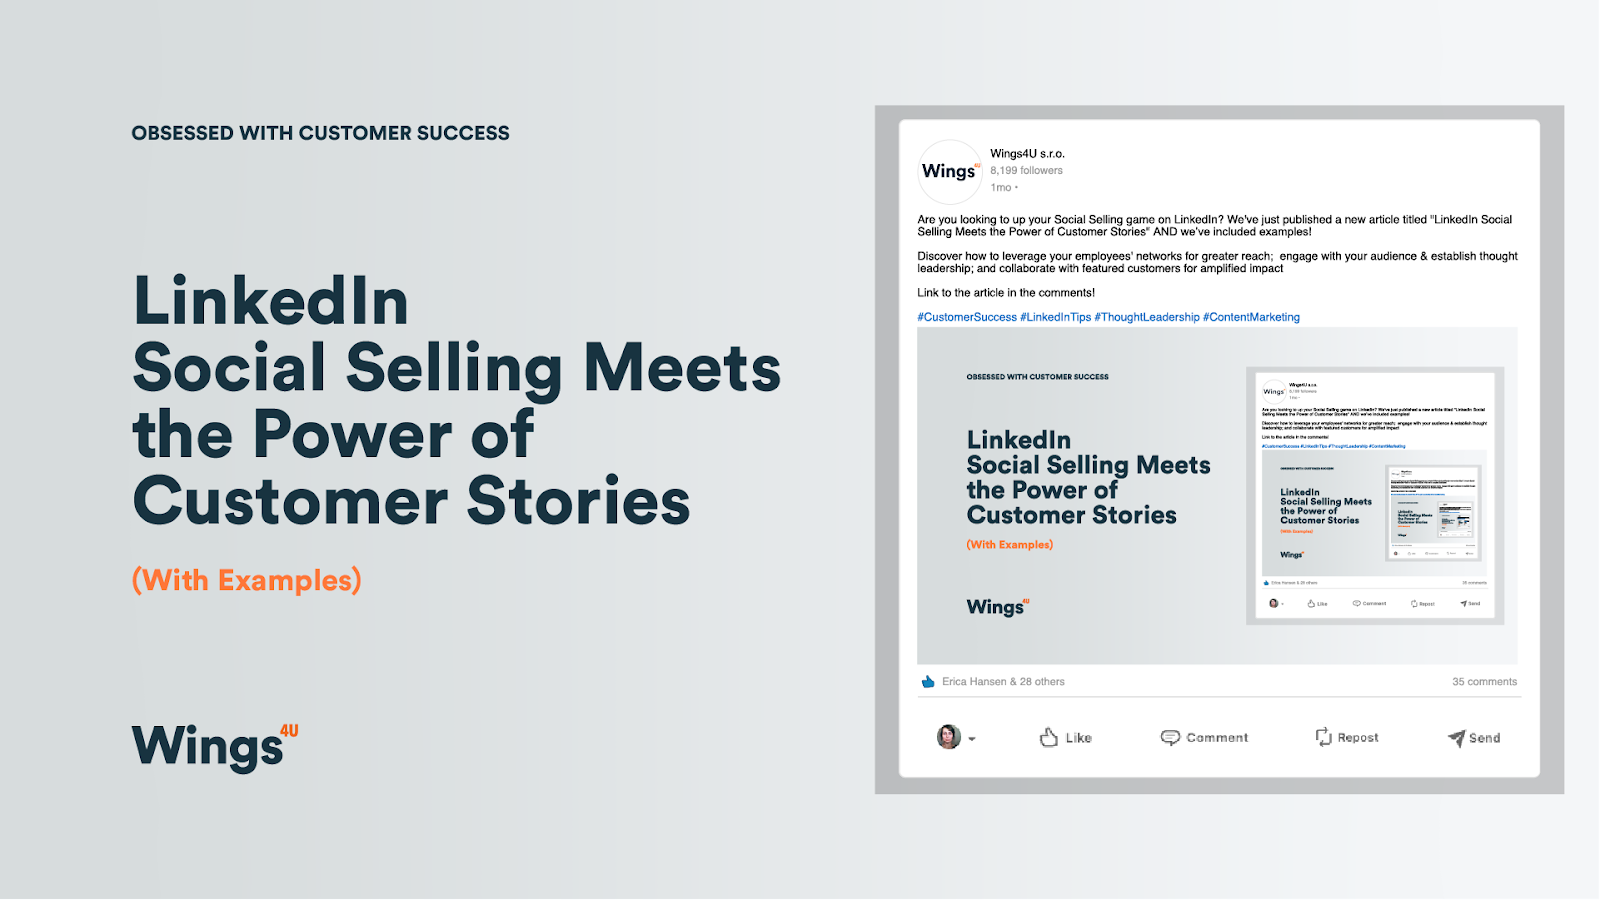 LinkedIn Social Selling Meets the Power of Customer Stories